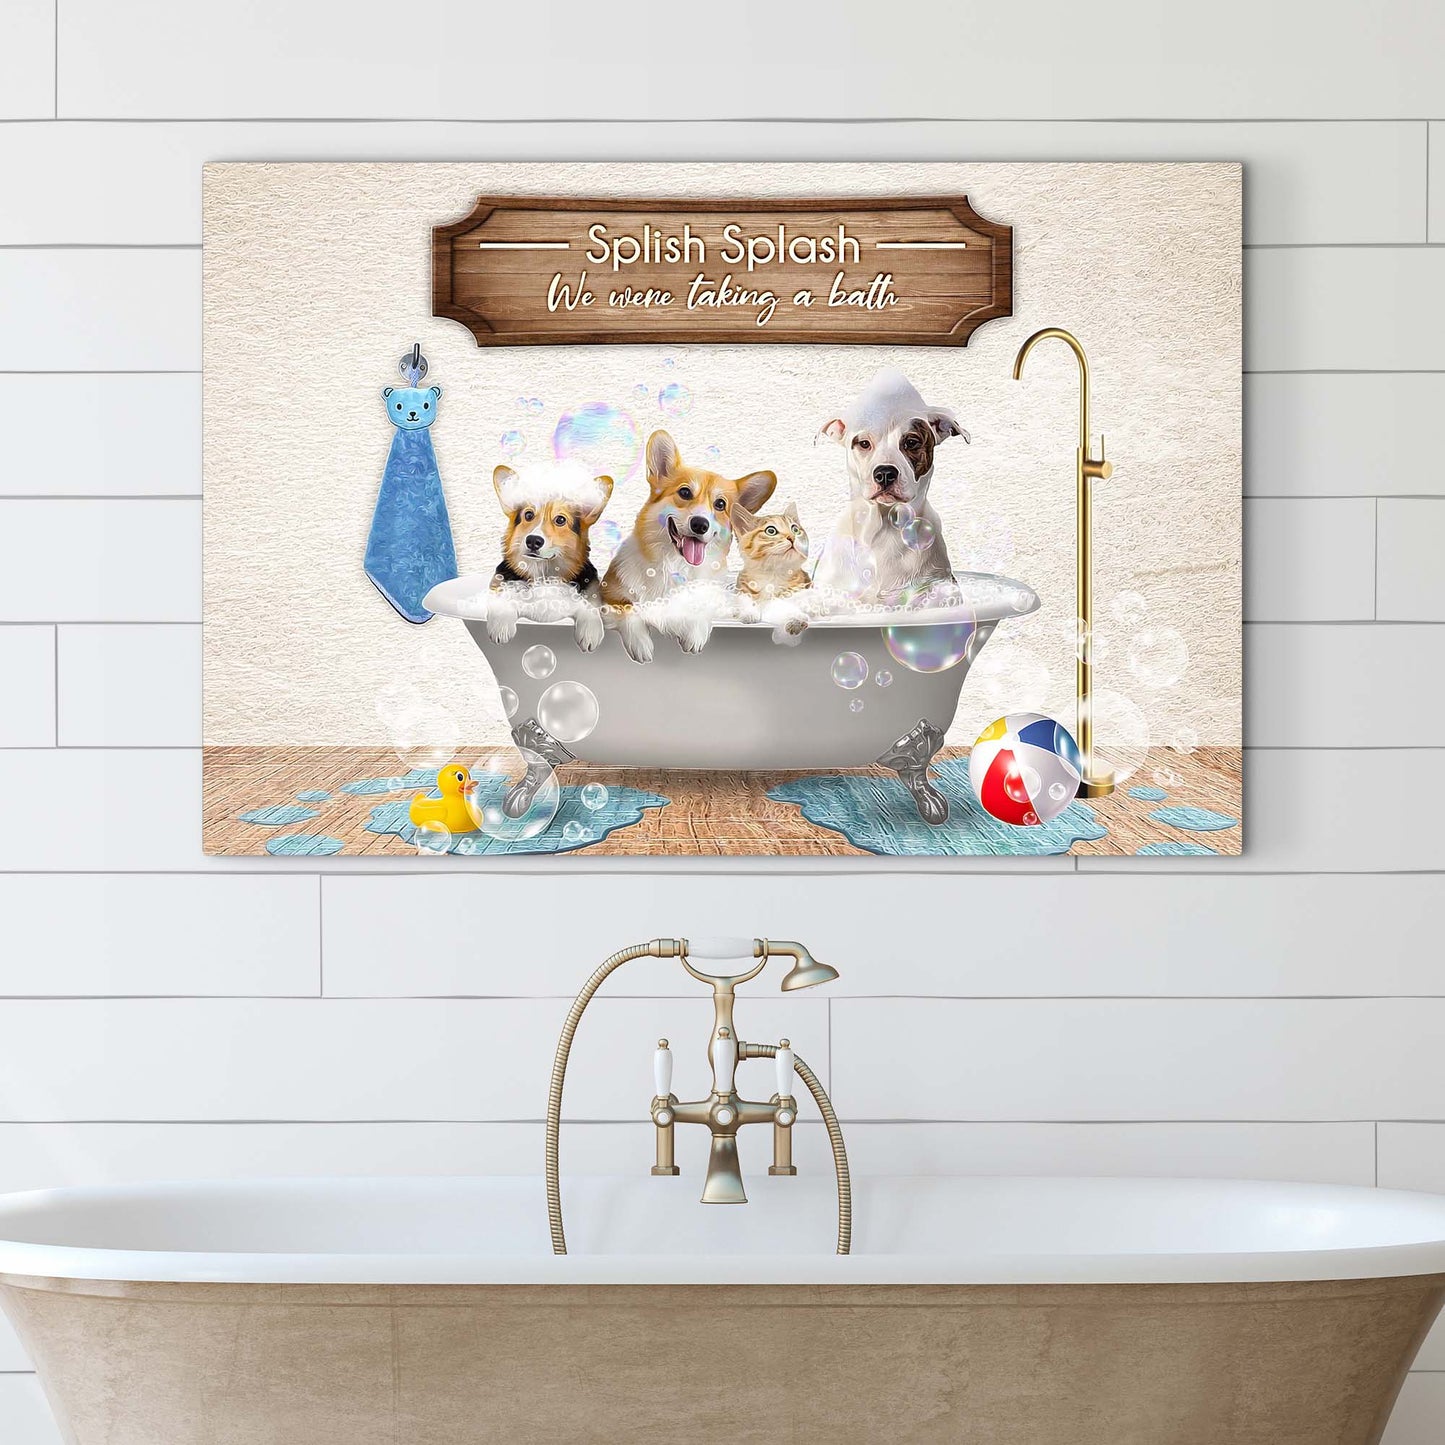 Splish Splash We Were Taking A Bath Sign - Image by Tailored Canvases